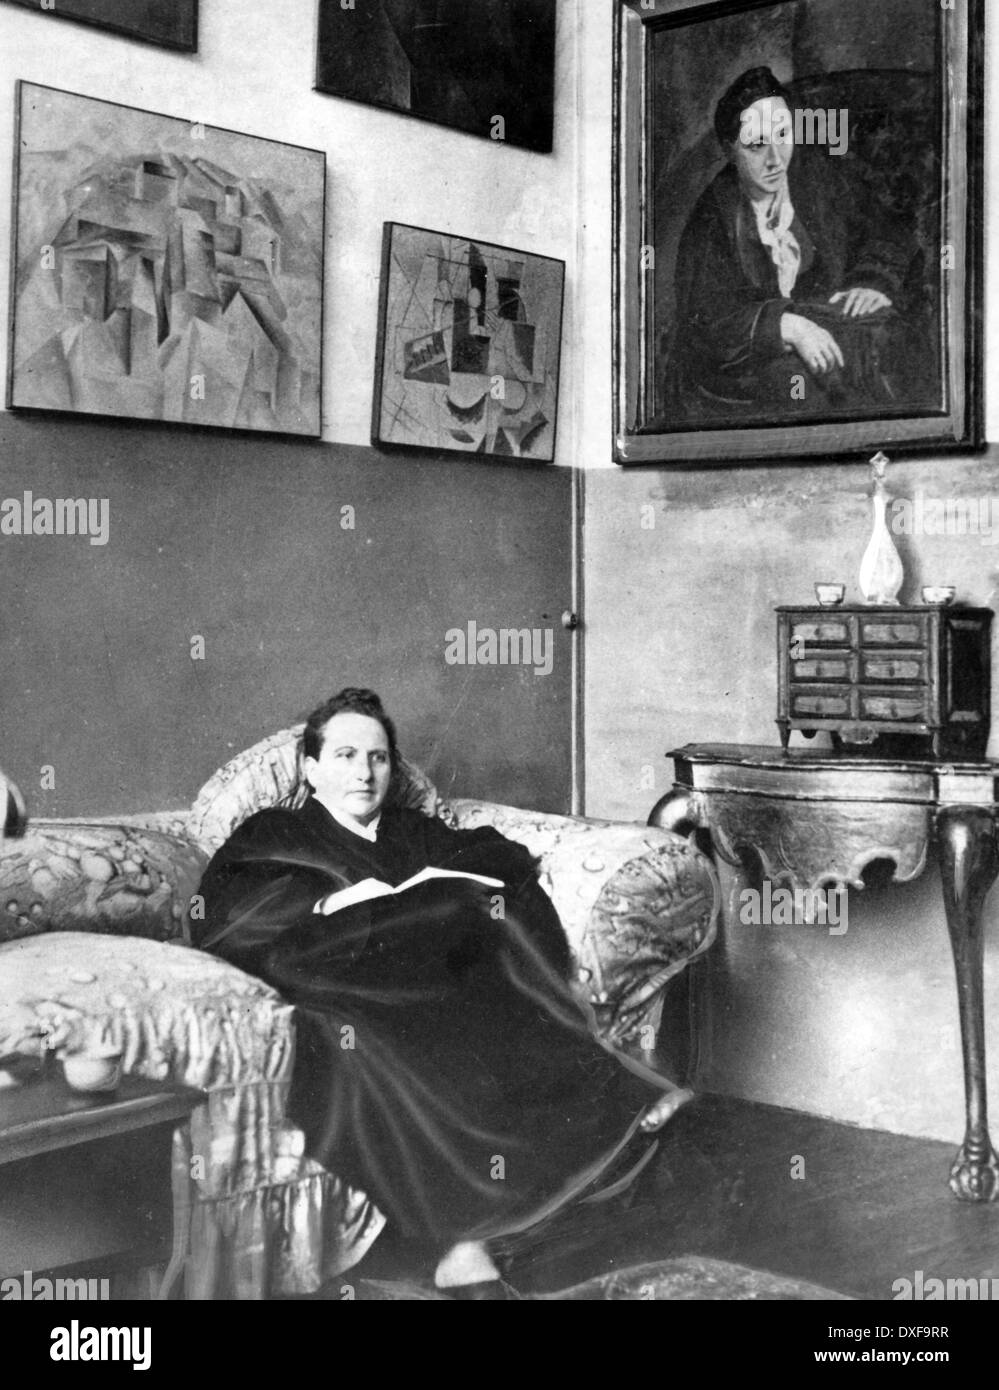 GERTRUDE STEIN (1874-1946) American writer in New York in 1935 with her portrait by Picasso on the wall Stock Photo